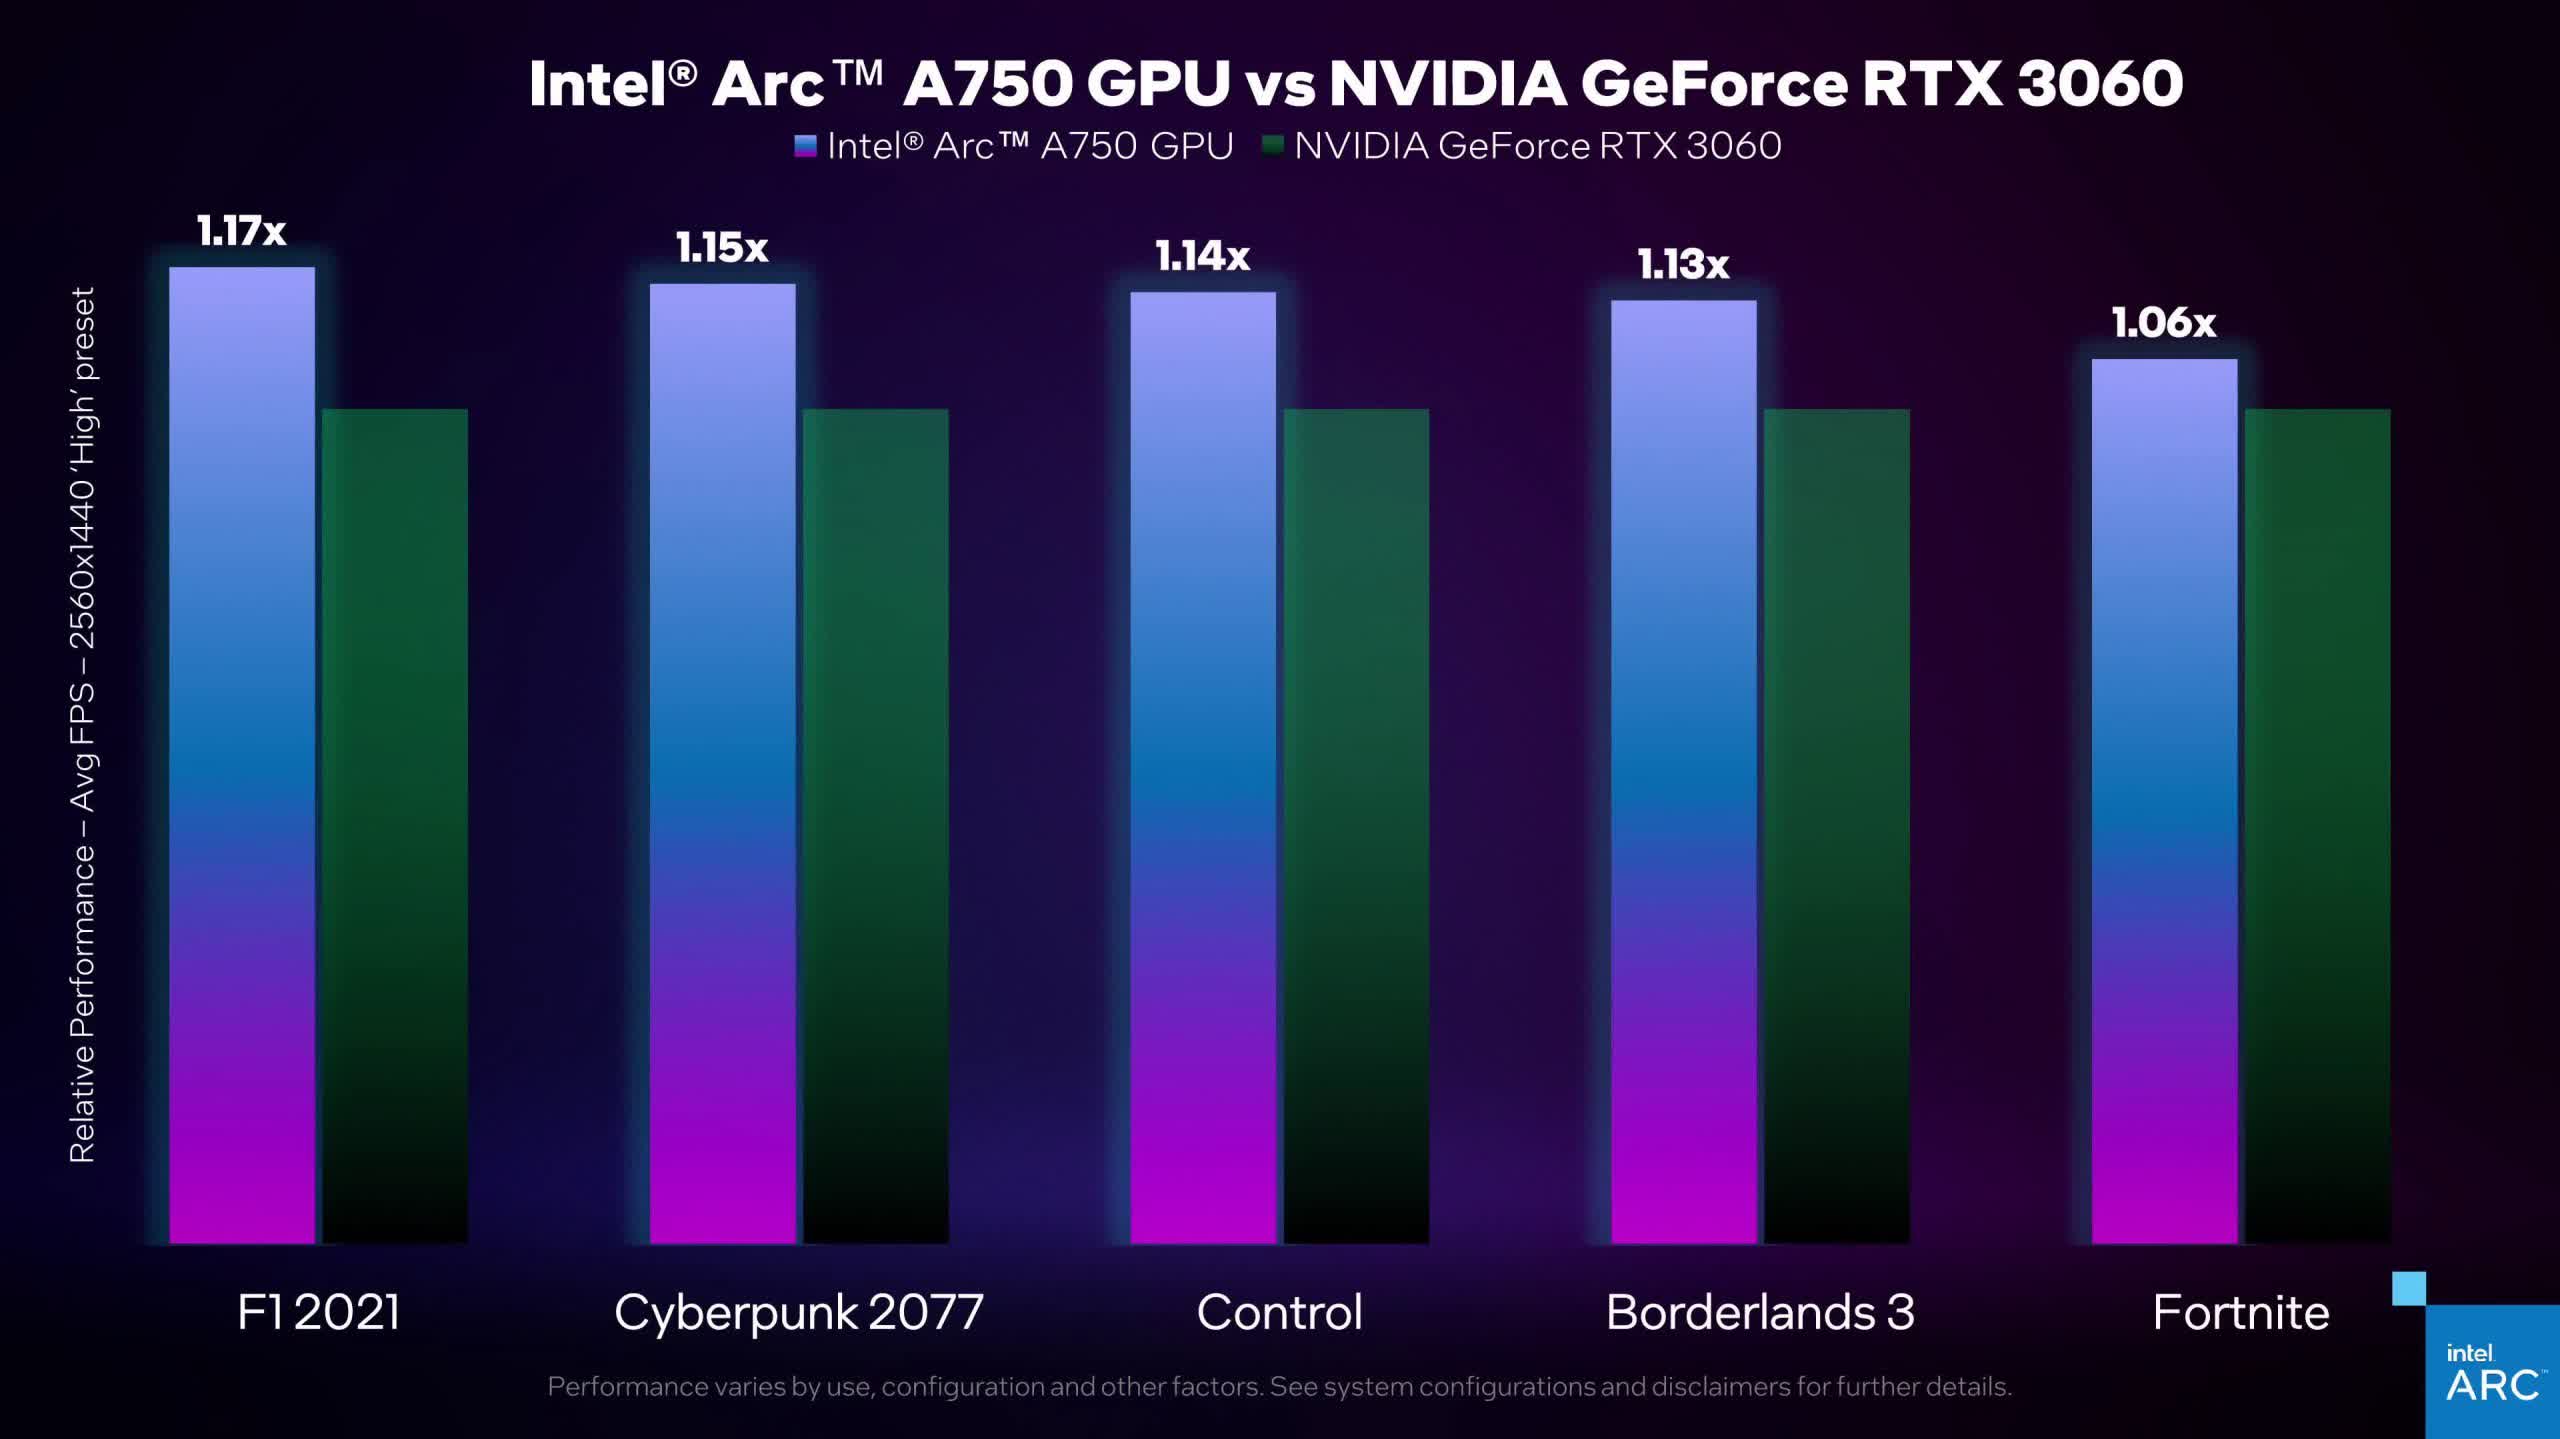 Intel's Arc A750 outperforms the RTX 3060, according to Intel